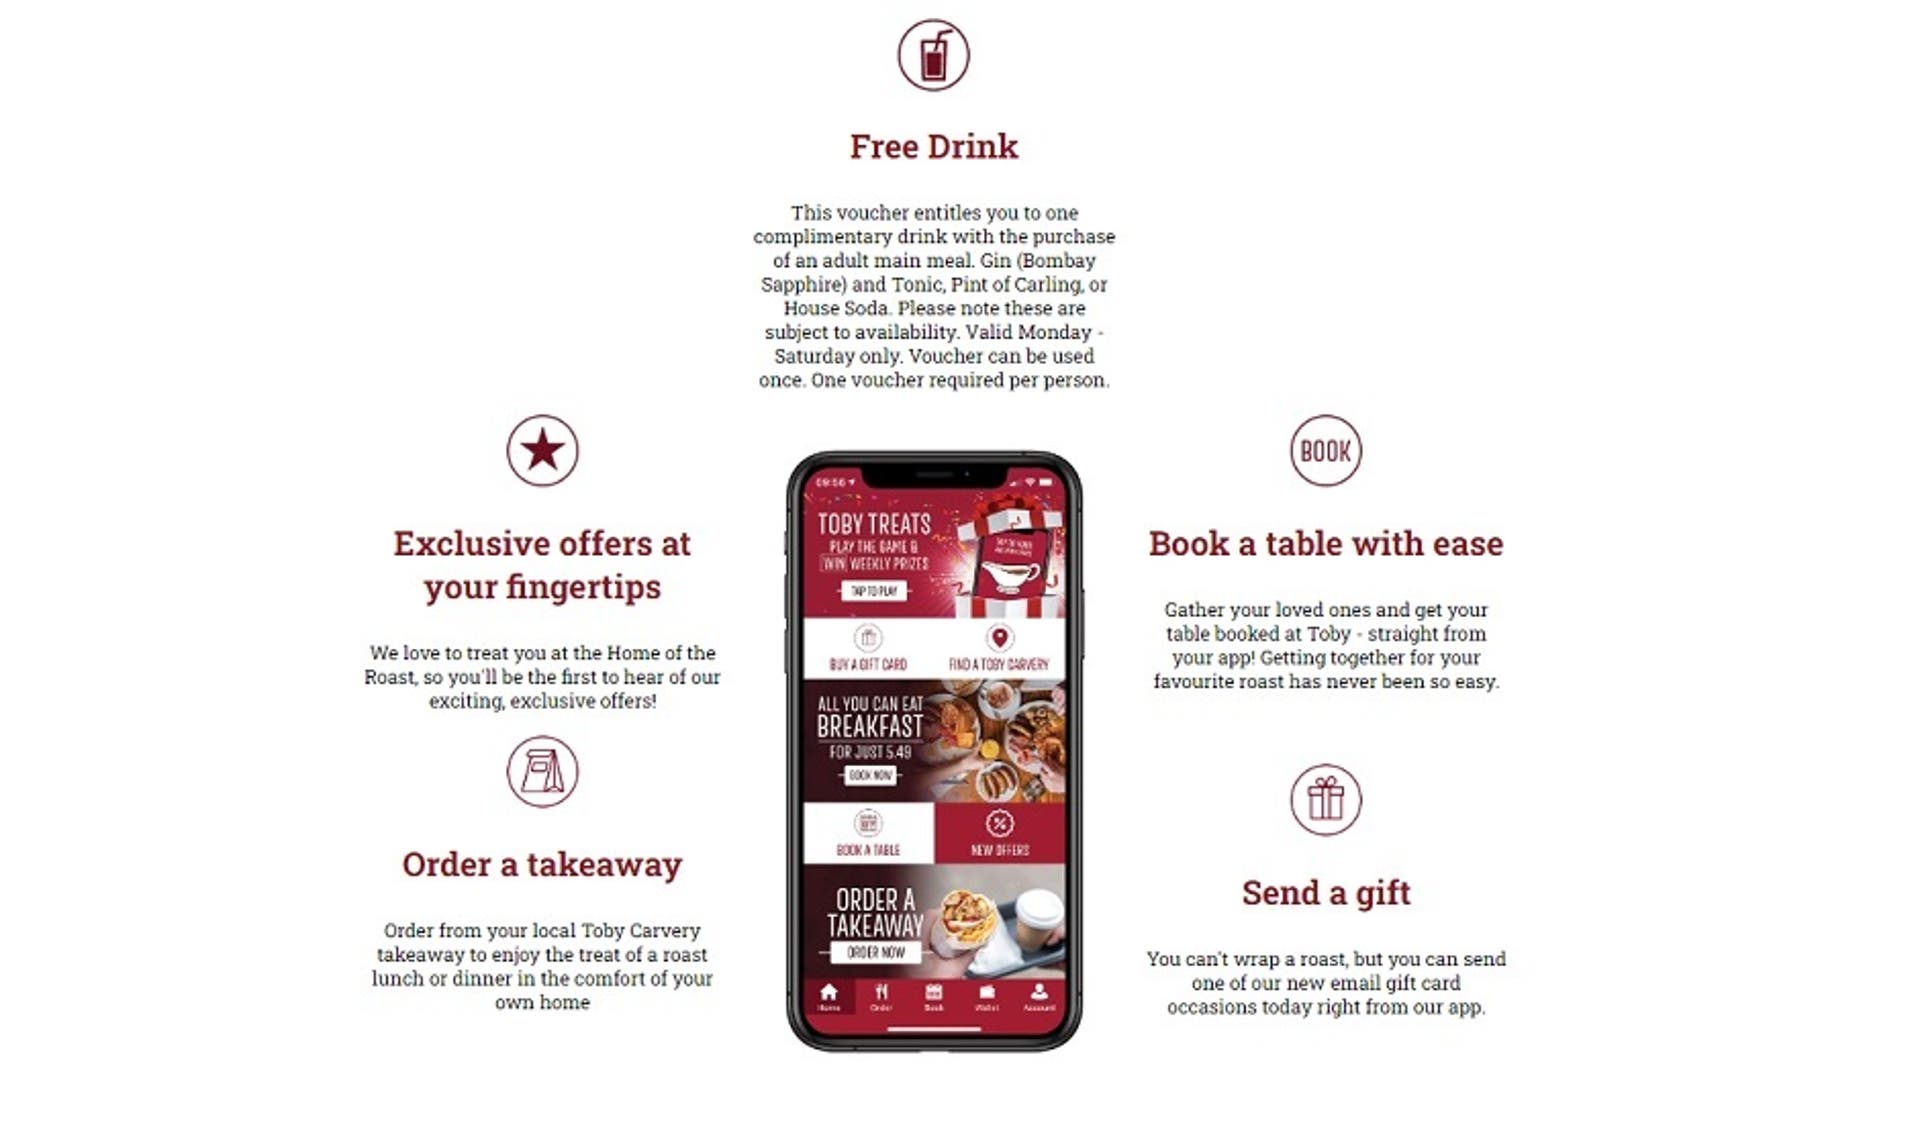  A digital illustration showing the benefits of using the Toby Carvery app with an image of a phone with the Toby Carvery app on screen. 